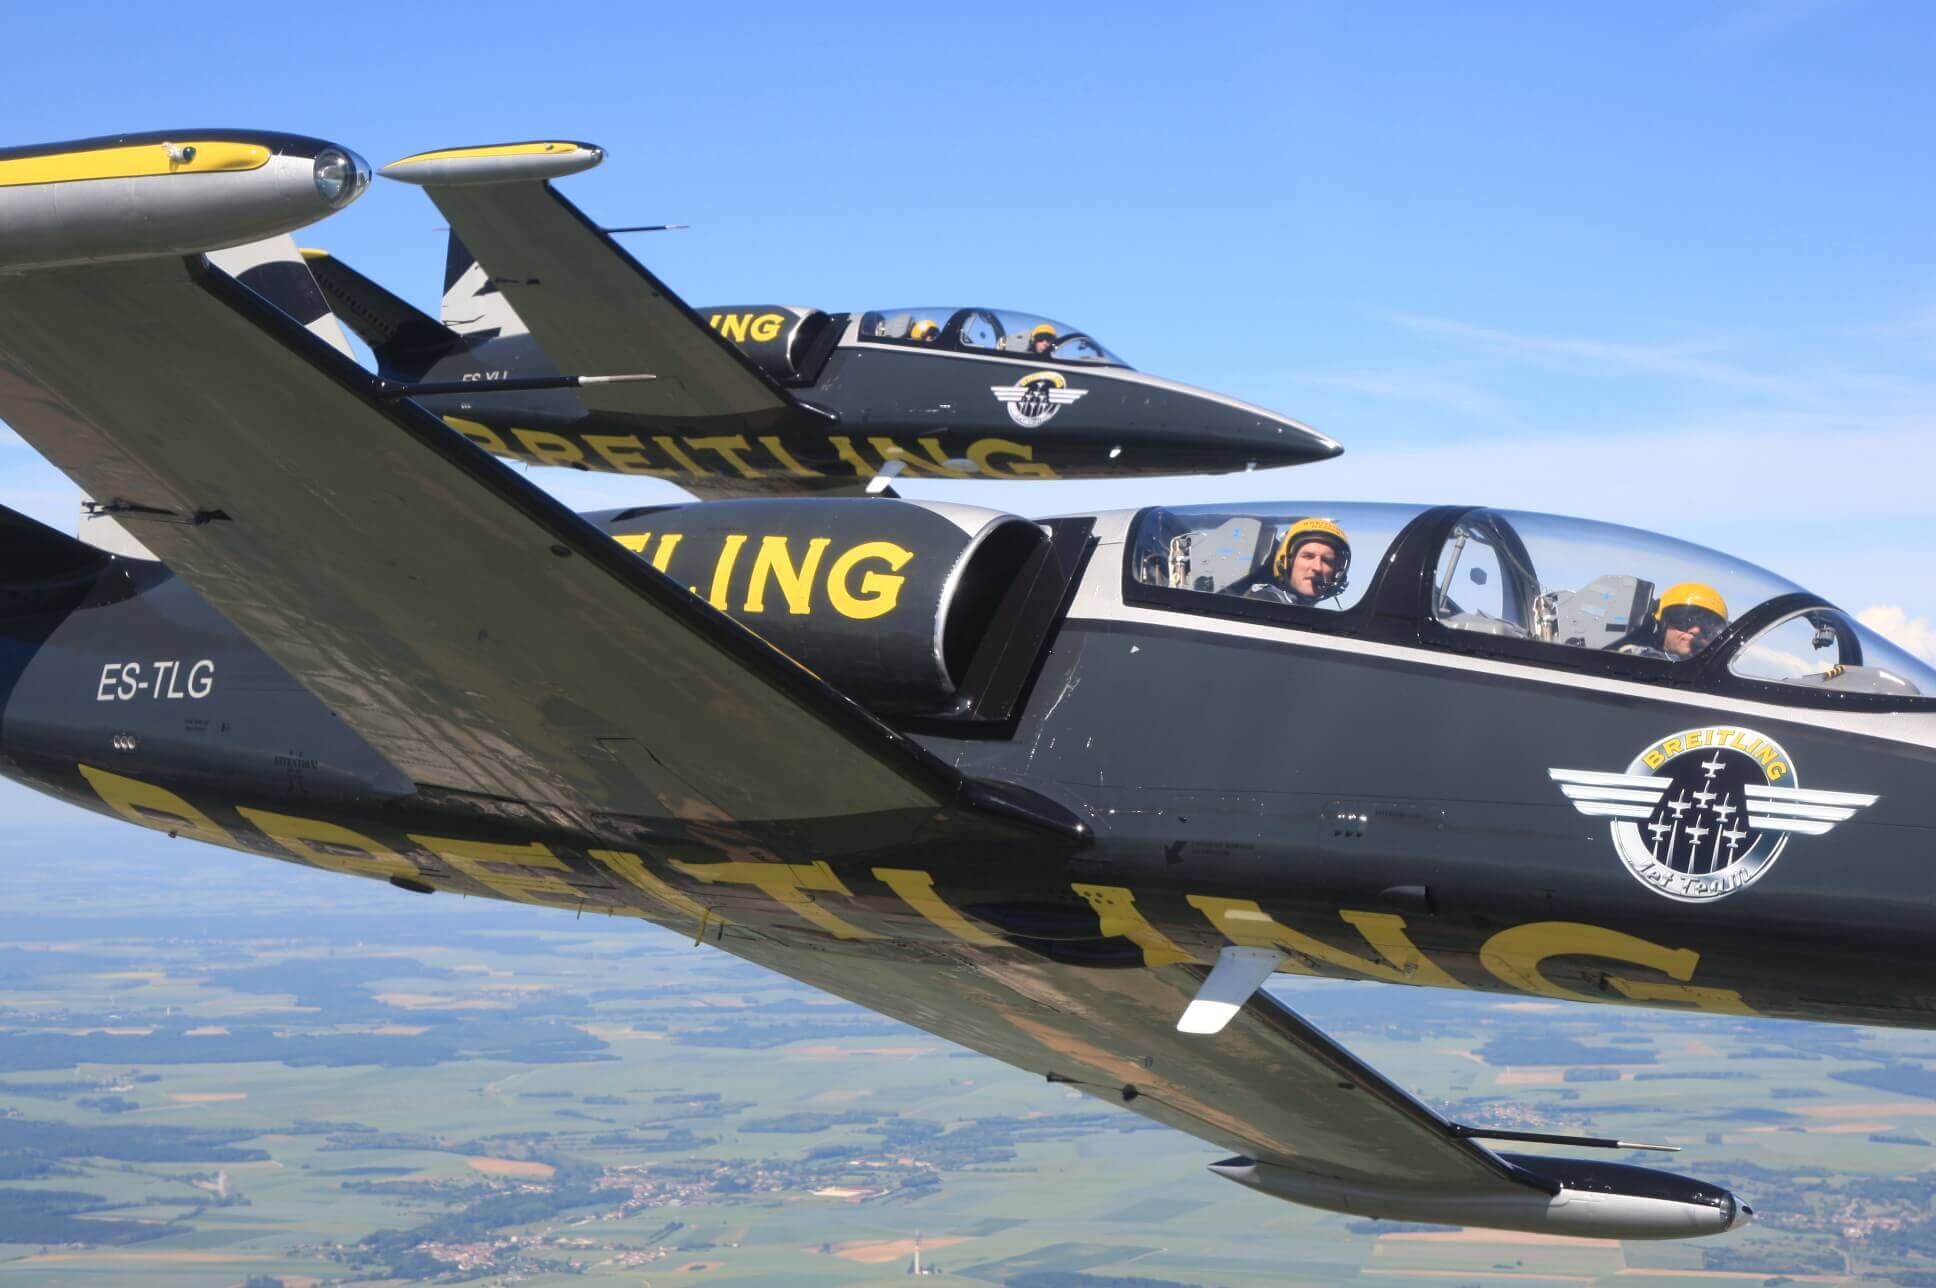 The L-39 has been in operation for over 50 years with more than 3